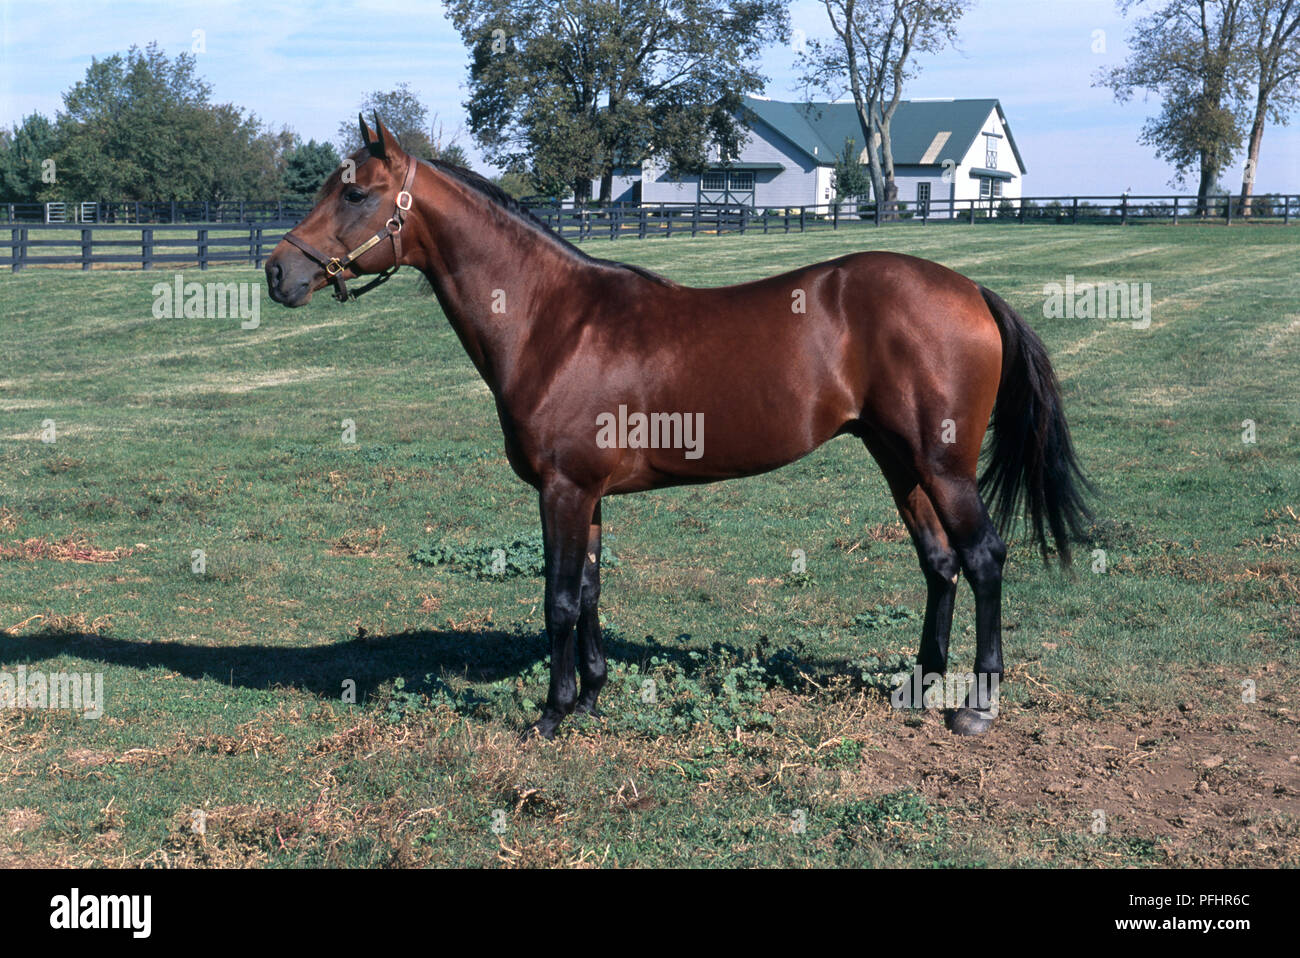 Bay American Standardbred horse standing in enclosed paddock with house in distance Stock Photo